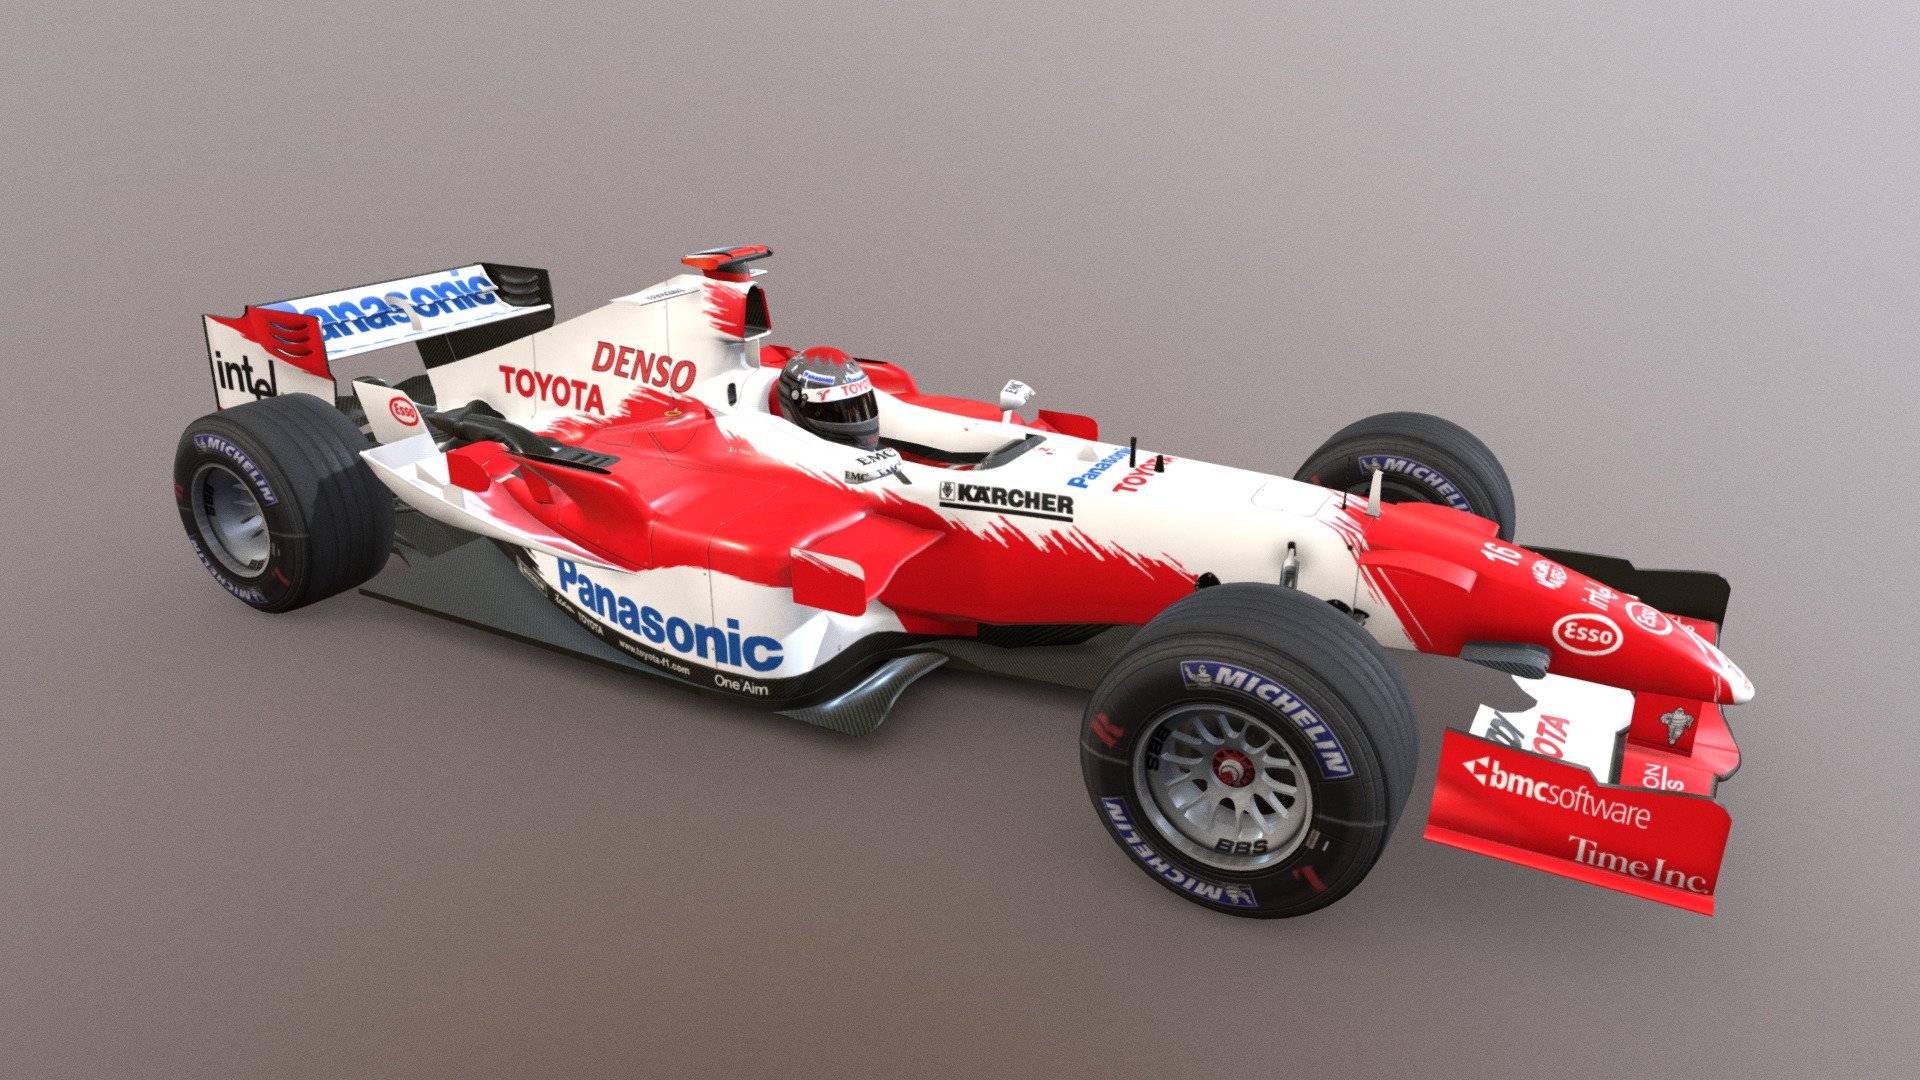 Carmodel of the 2004 Toyota F1 car as created for the CTDP 2005 mod for rFactor. This car created in late 2004 and was a hot potatoe as nobody in the team wanted to do it. It passed hands a few times between modelers Neidryder, and Alless. Painting started by Enzo and KJ, but was finished by Dahie who subsequently also painted the 2005 Toyota right after 3d model